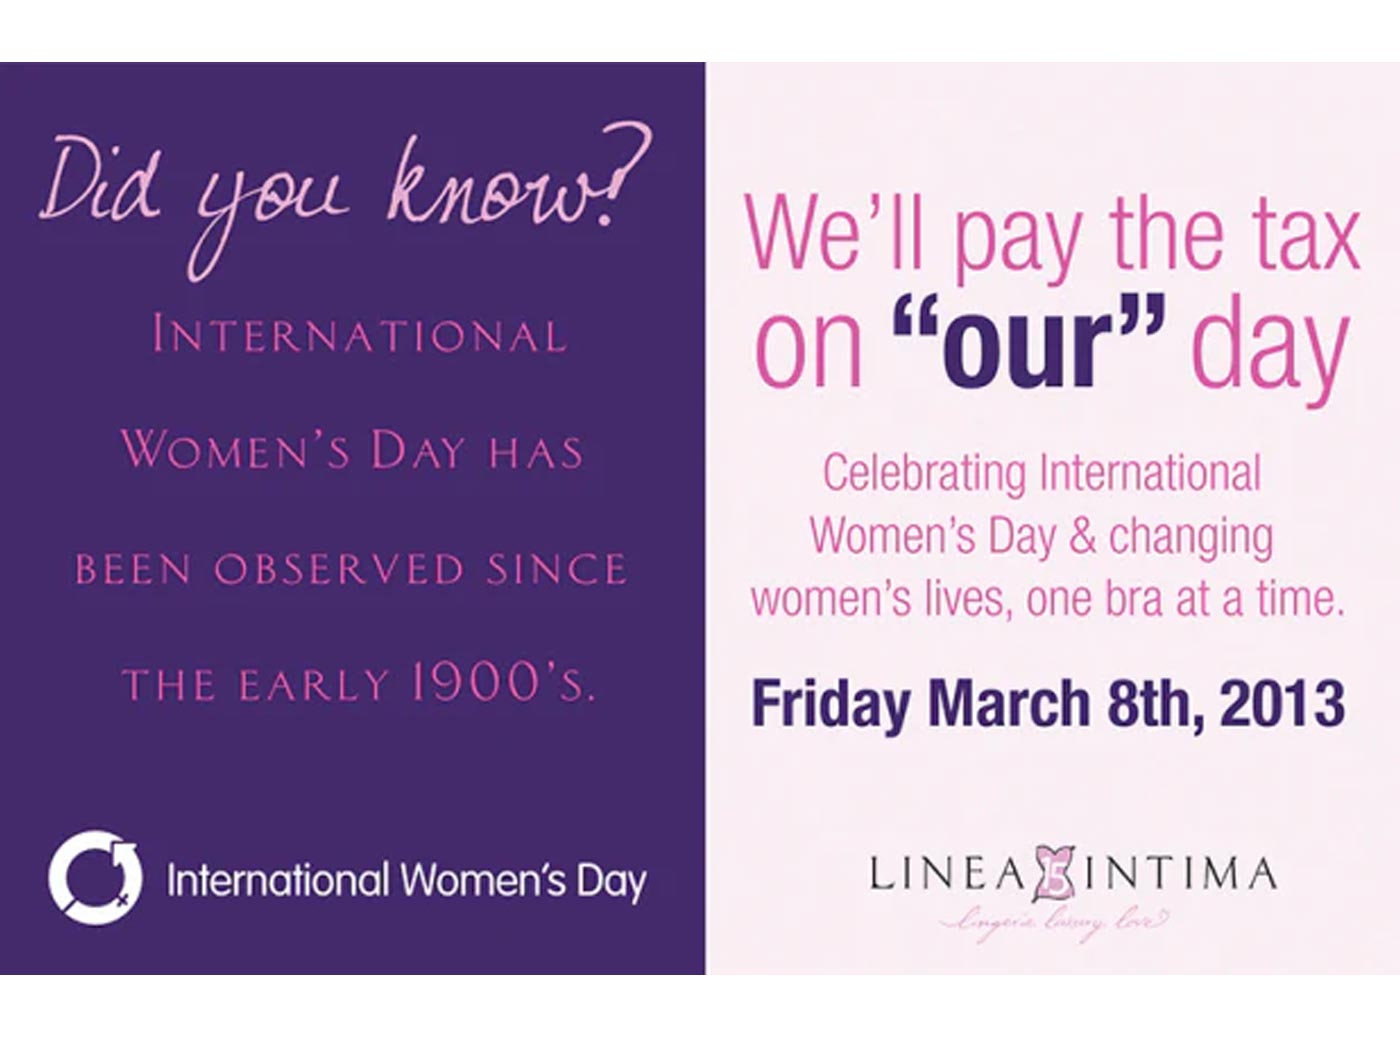 Save the Tax and help us celebrate International Women's Day - March 8th only